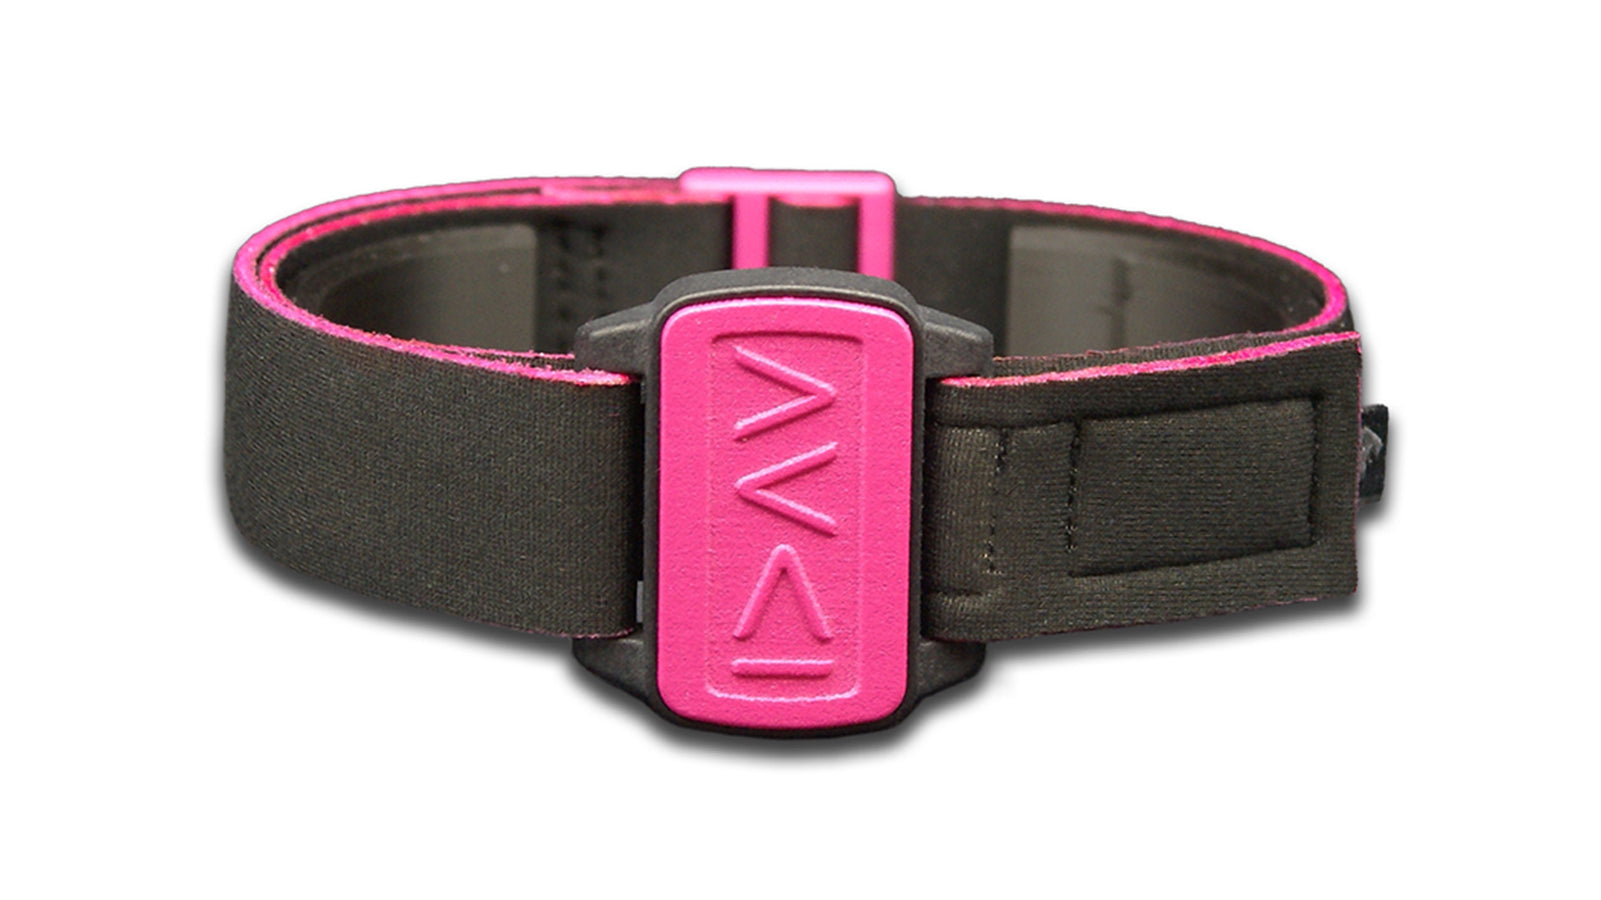 Dexband armband cover in magenta with motif I am Greater in symbols. Black strap edged in coordinating magenta.